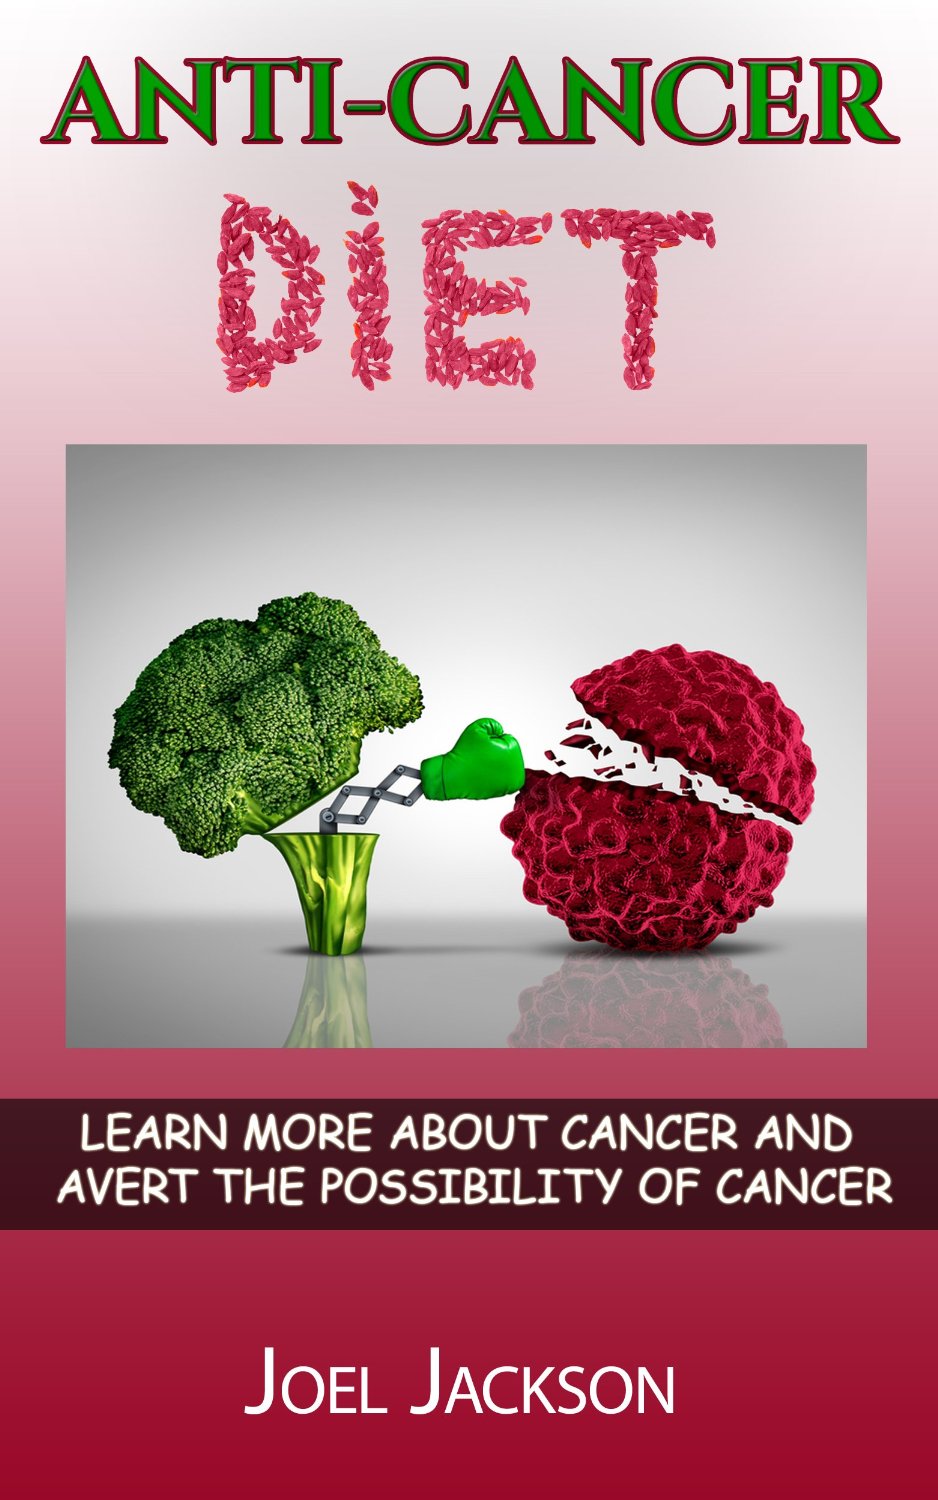 Anti-Cancer Diet : learn more about cancer and avert the possibility of cancer by Joel Jackson